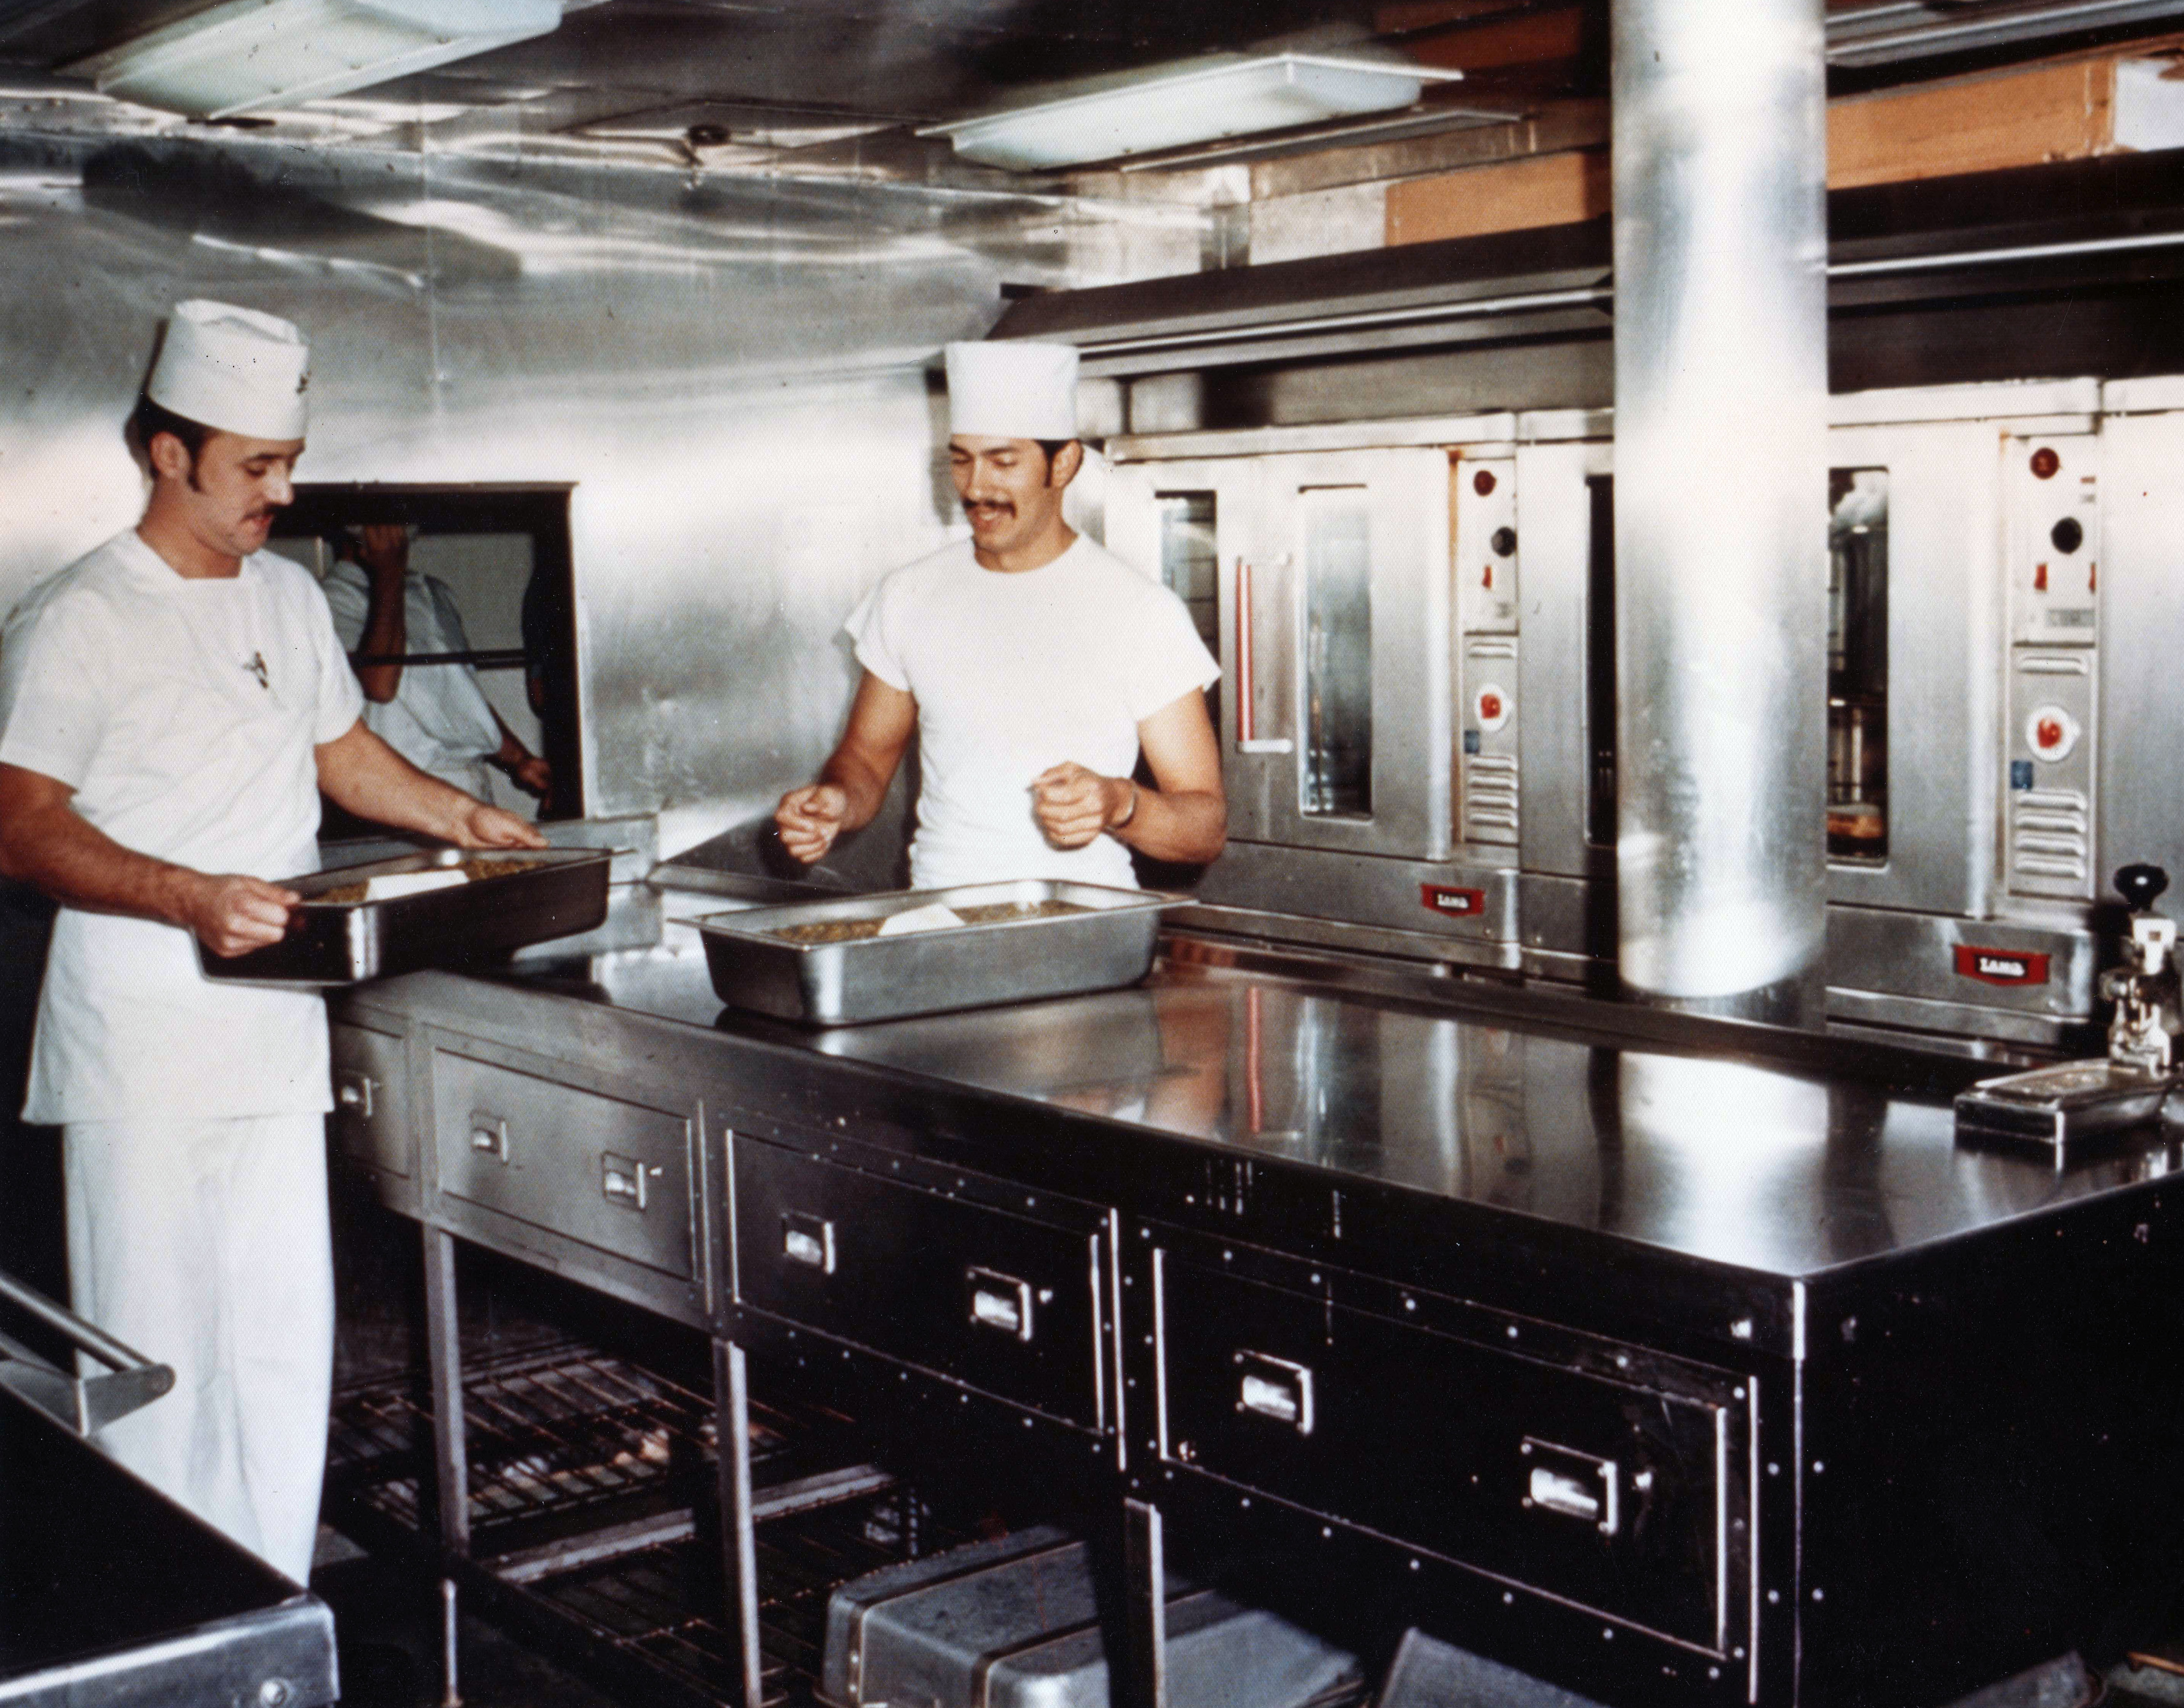 Galley aboard USS Proteus while at Mare Island Naval Shipyard, California, United States, Nov 1972